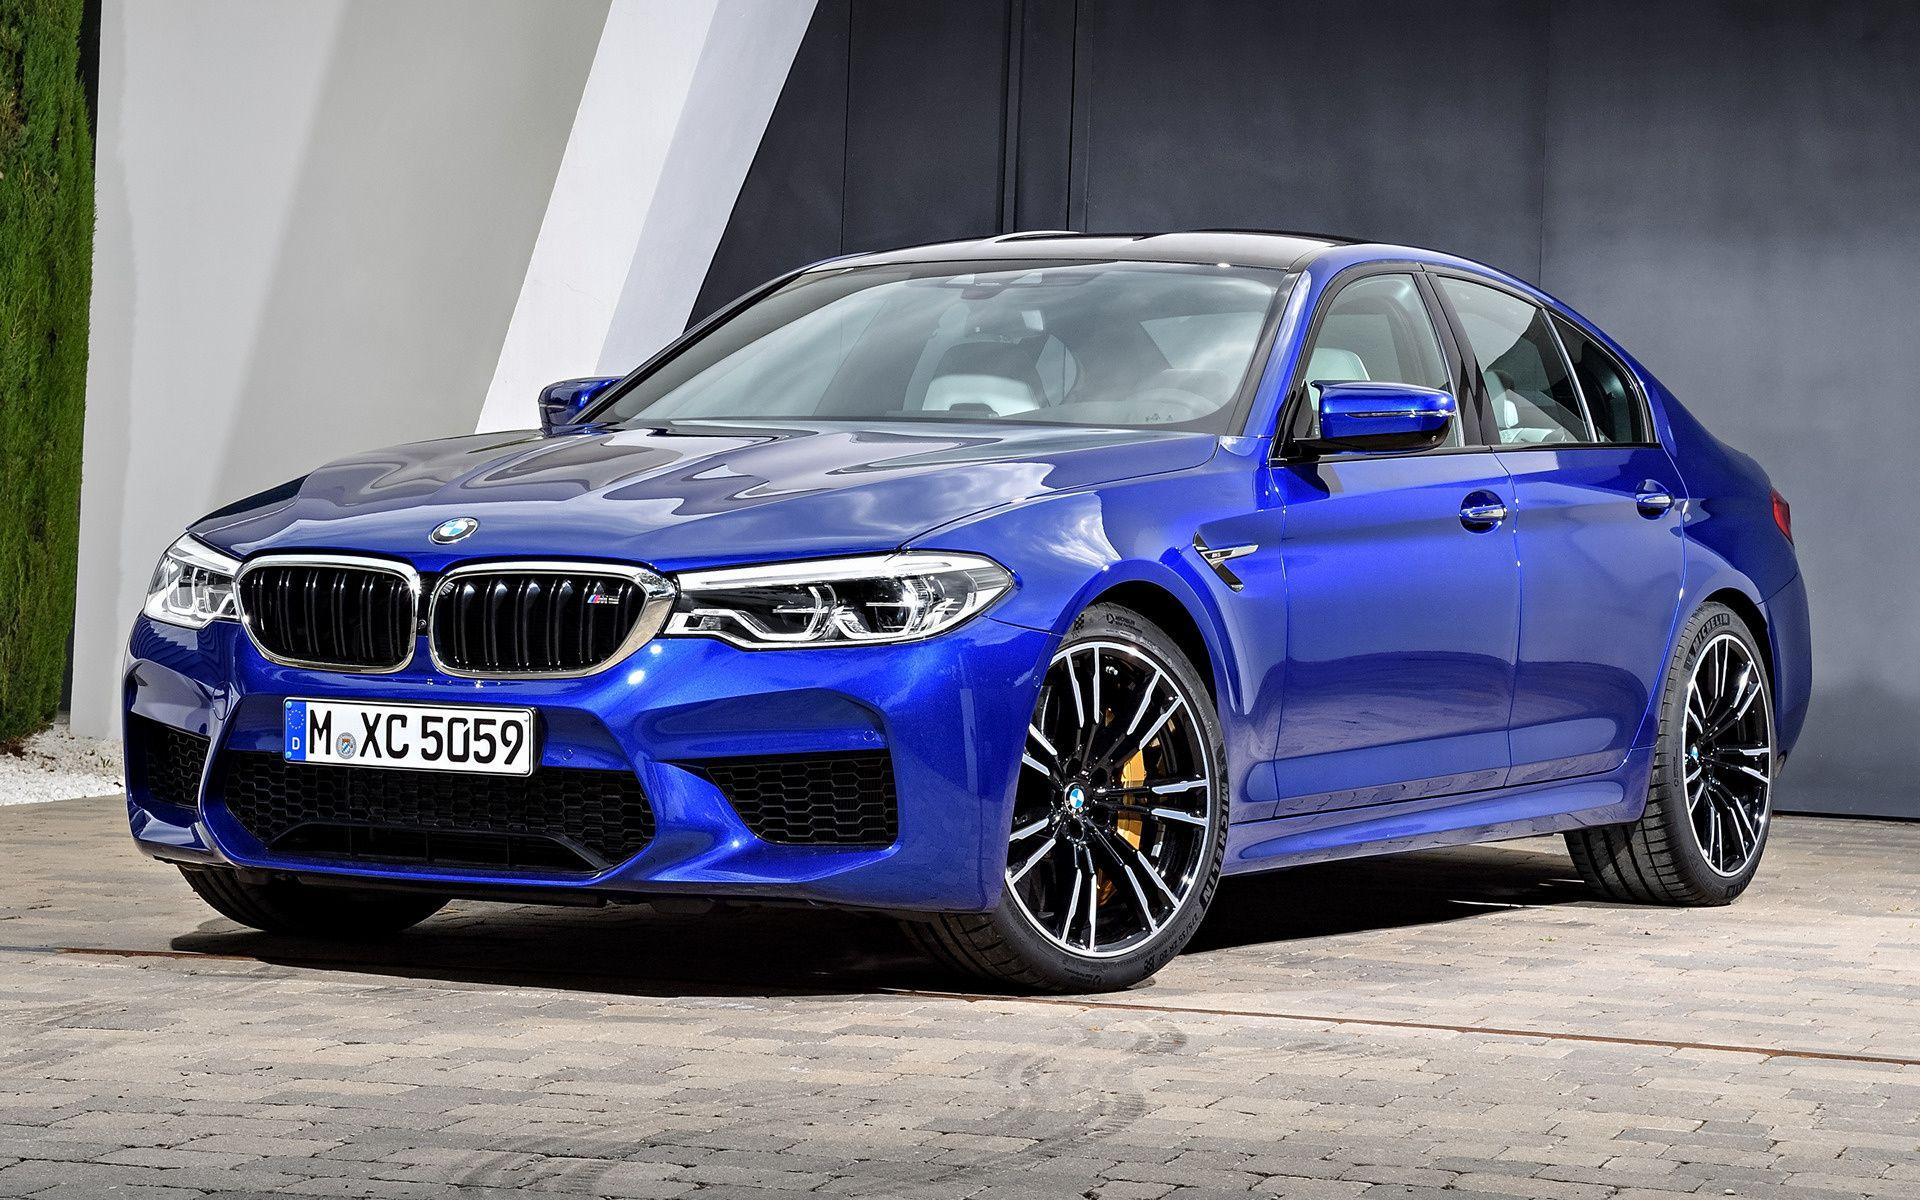 BMW M5 (2018) Wallpaper and HD Image